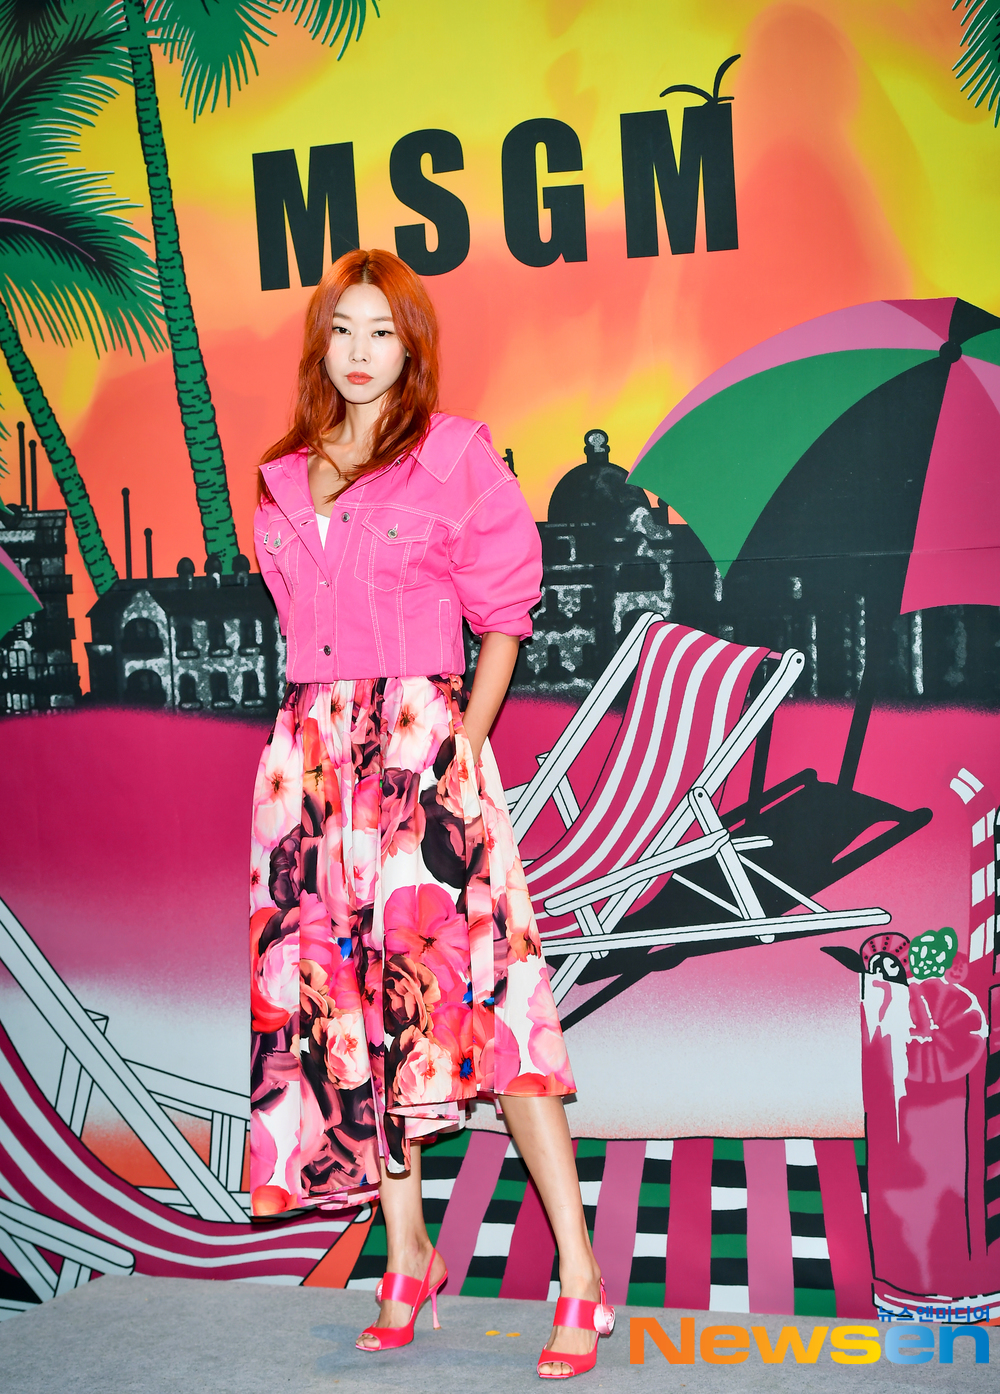 The fashion brand MSGM photo call event was held at Cheongdam branch in Hanstyle, Seoul on the afternoon of March 27th.On this day, model Han Hye-jin is attending and posing.Lee Jae-ha